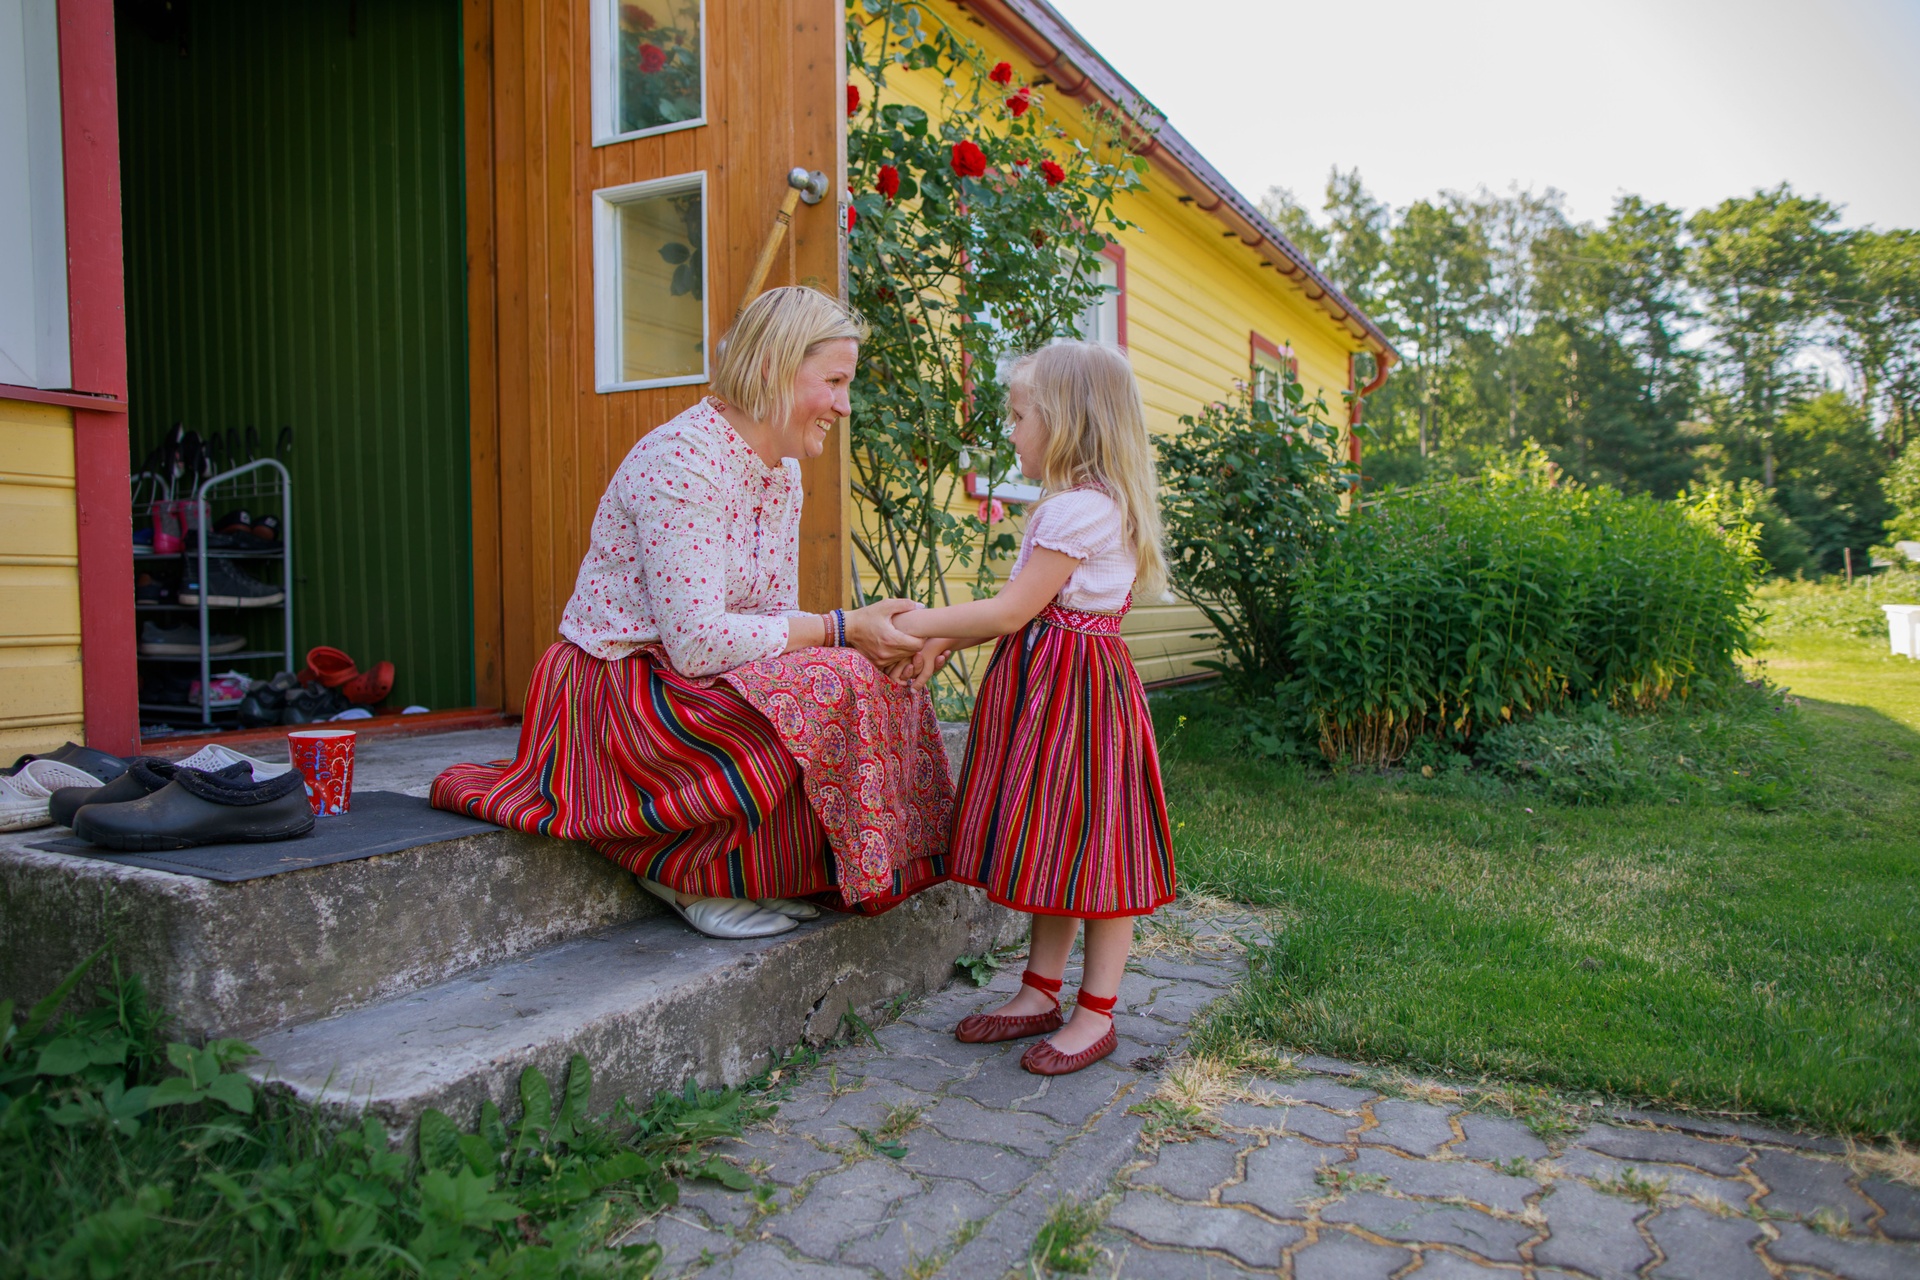 Estonian culture — discover something unexpected